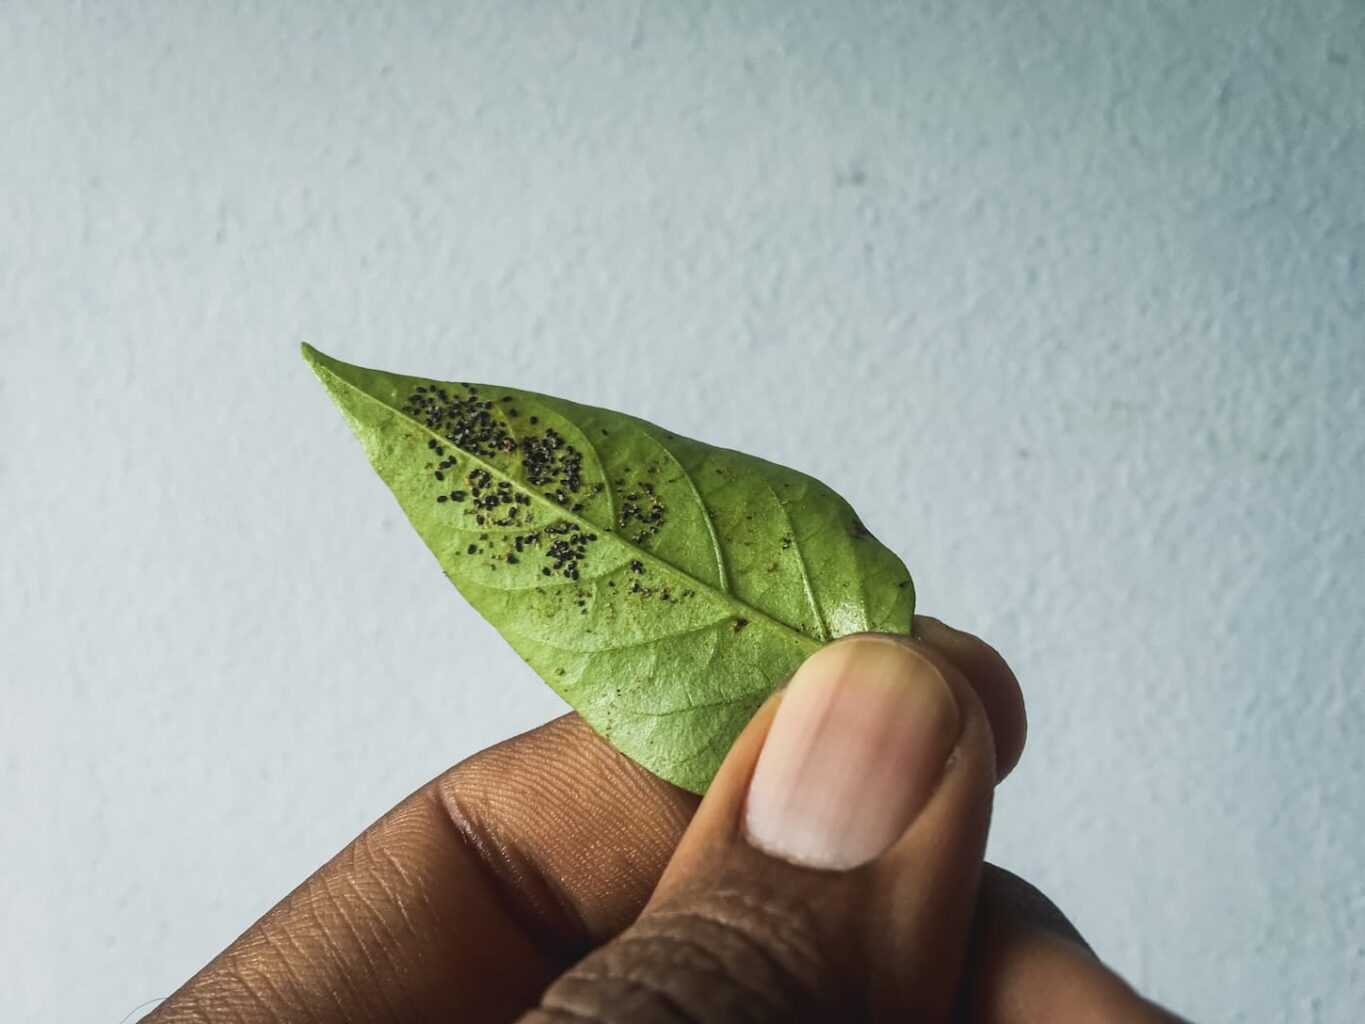 An image of a leaf containing bugs